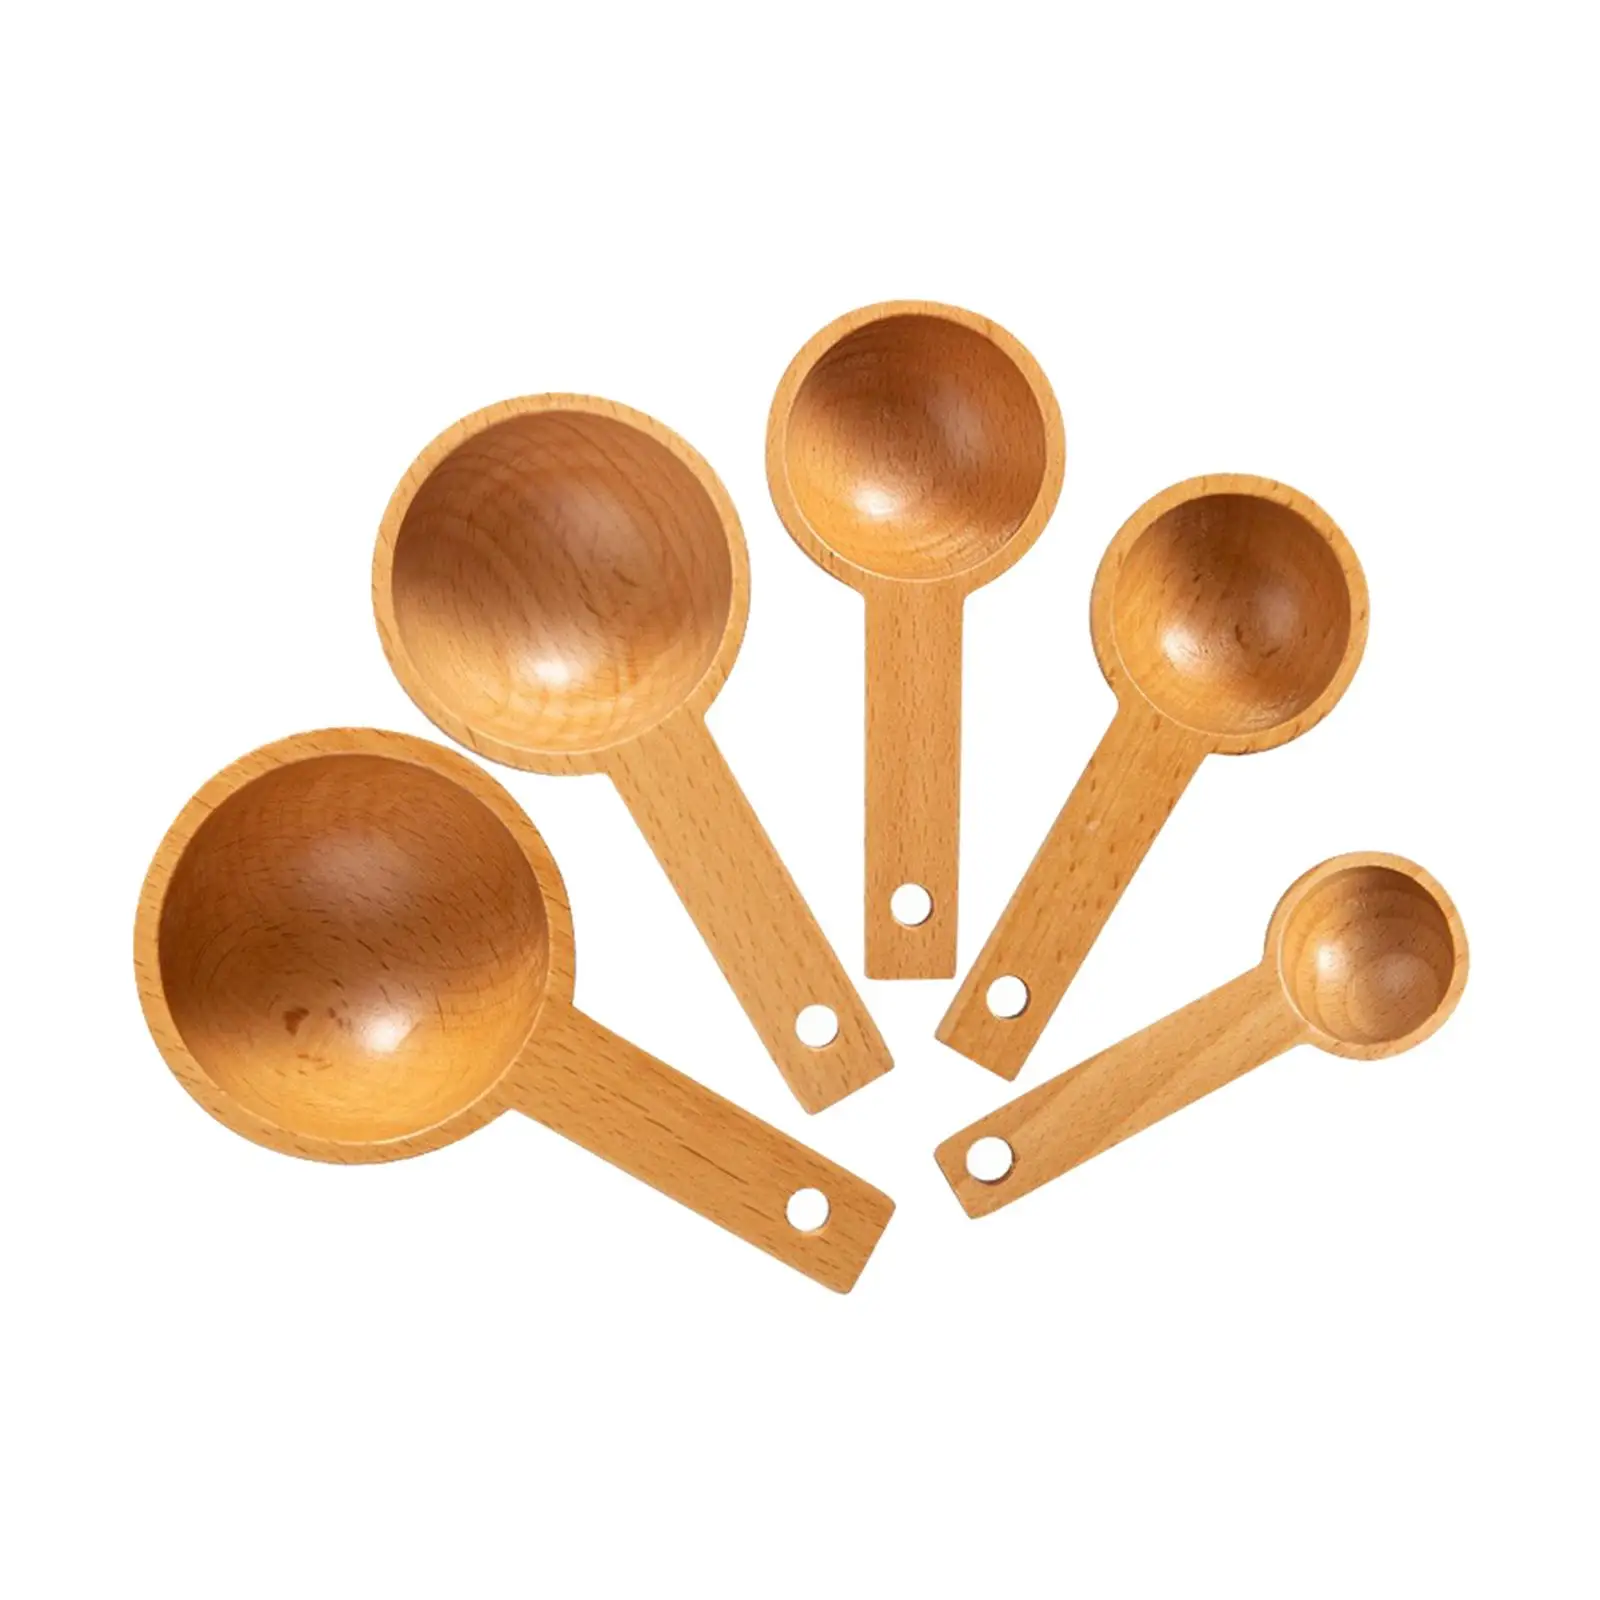 Set of 5 Wood Measuring Spoons Gadgets for Dining Dry Liquid Food Cooking